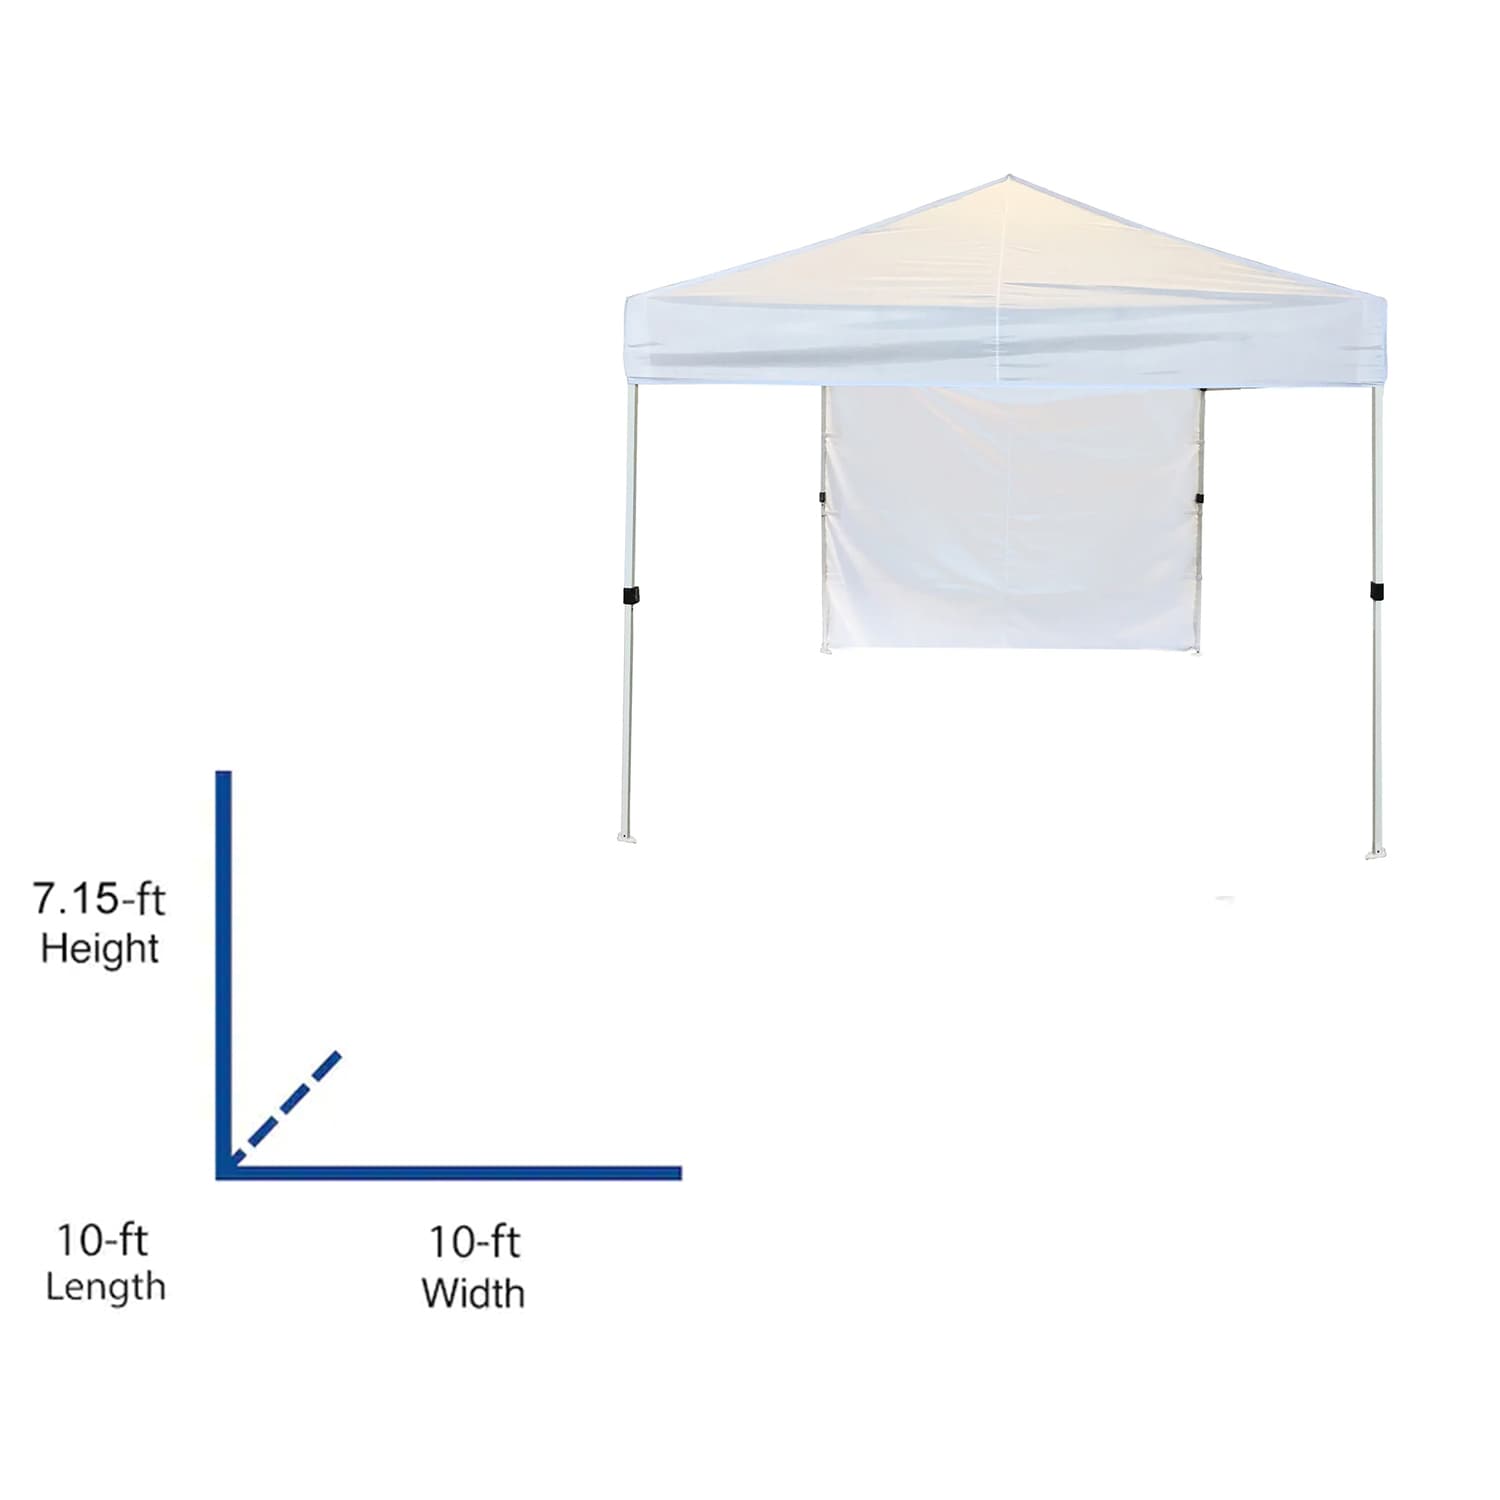 Z-Shade 10-ft x 10-ft Square White Pop-up Canopy in the Canopies 